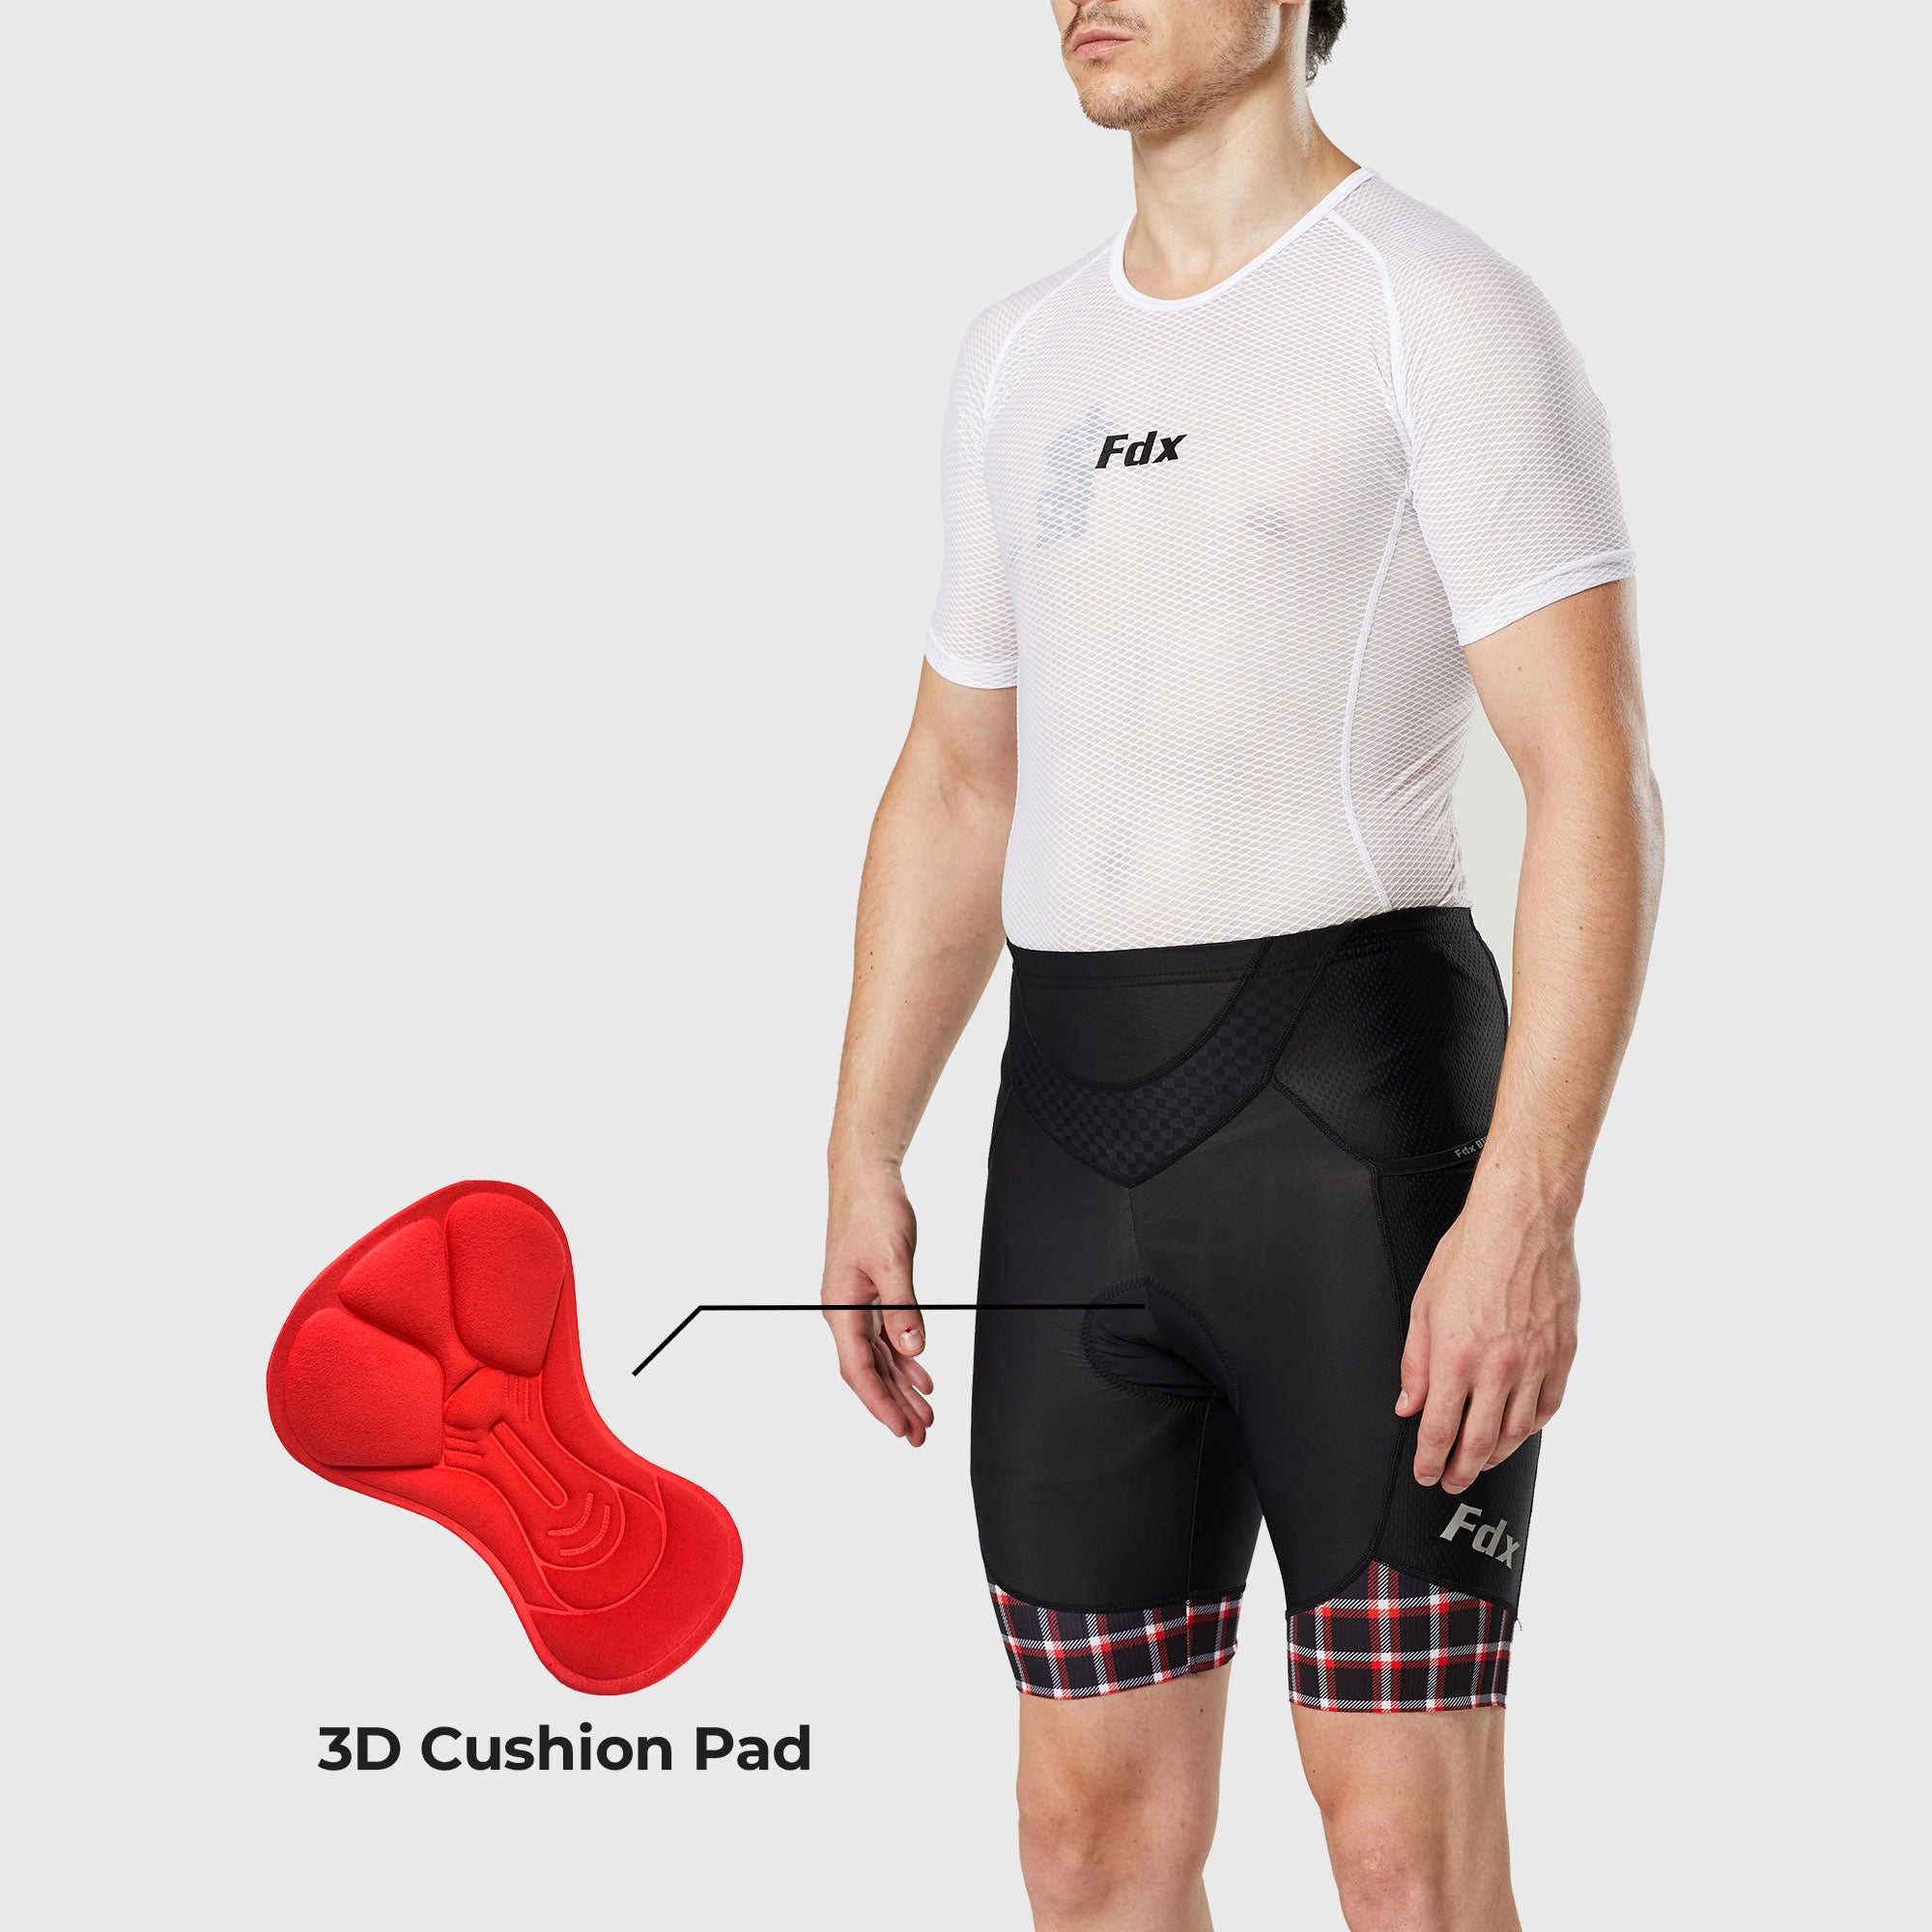 Men’s Black & Red Cycling Shorts 3D Gel Padded comfortable road bike shorts - Breathable Quick Dry biking shorts, ultra-lightweight shorts with pockets